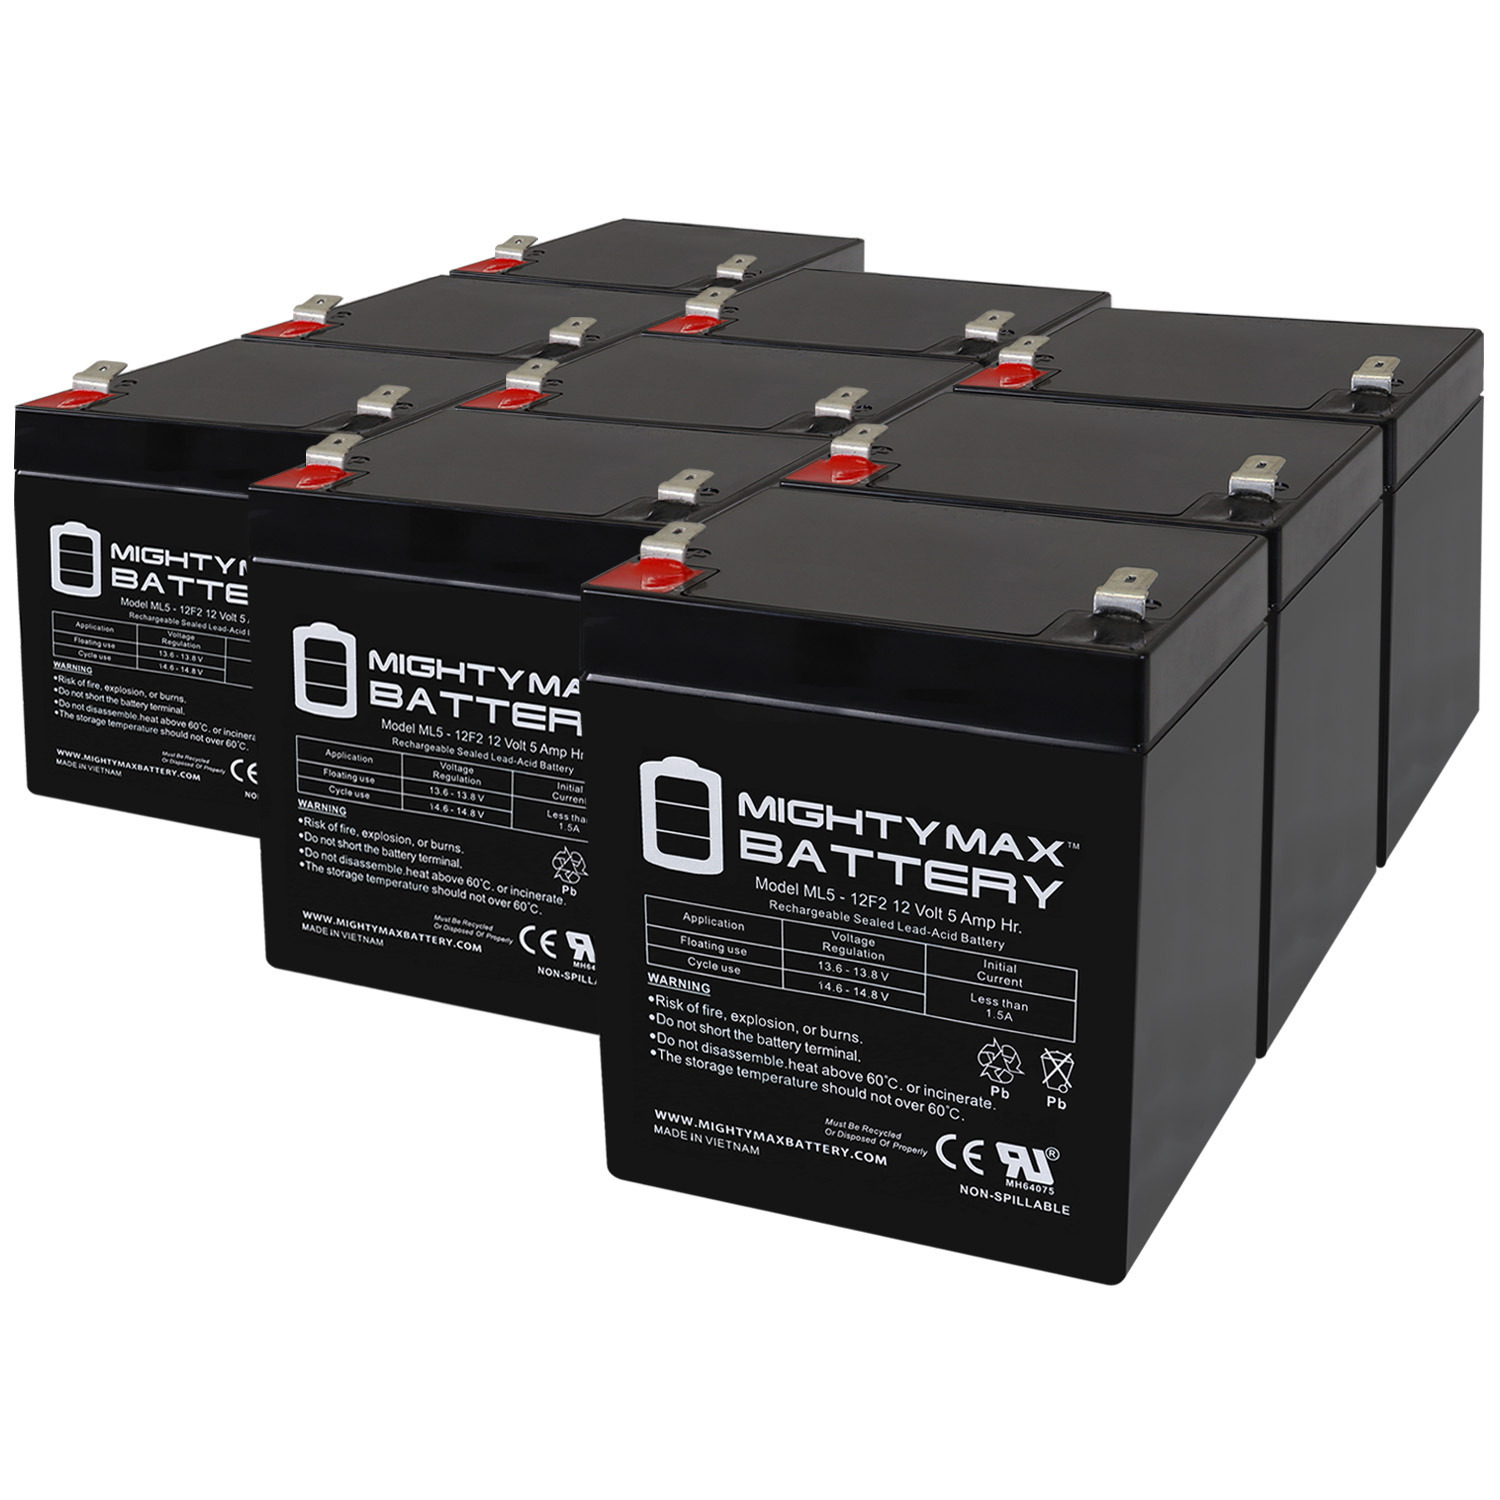 12V 5Ah F2 SLA Replacement Battery for Unisys PW5125 2400i RM - 9 Pack